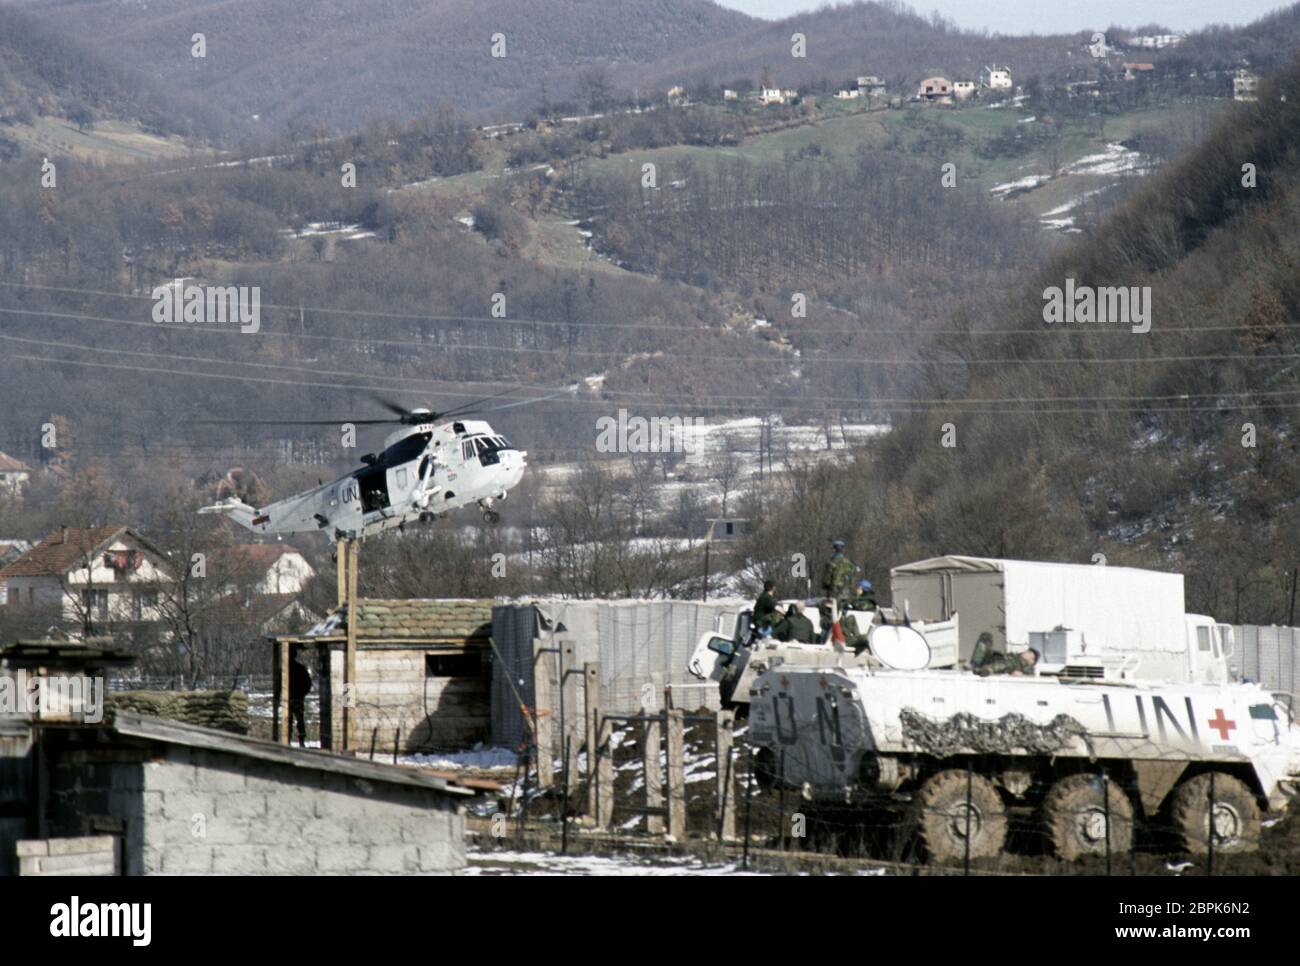 27th February 1994 During the war in Bosnia: a Royal Navy Sea King HC4 helicopter of 845 Naval Air Squadron comes in for a landing at the British base in Bila, just outside Vitez. Stock Photo